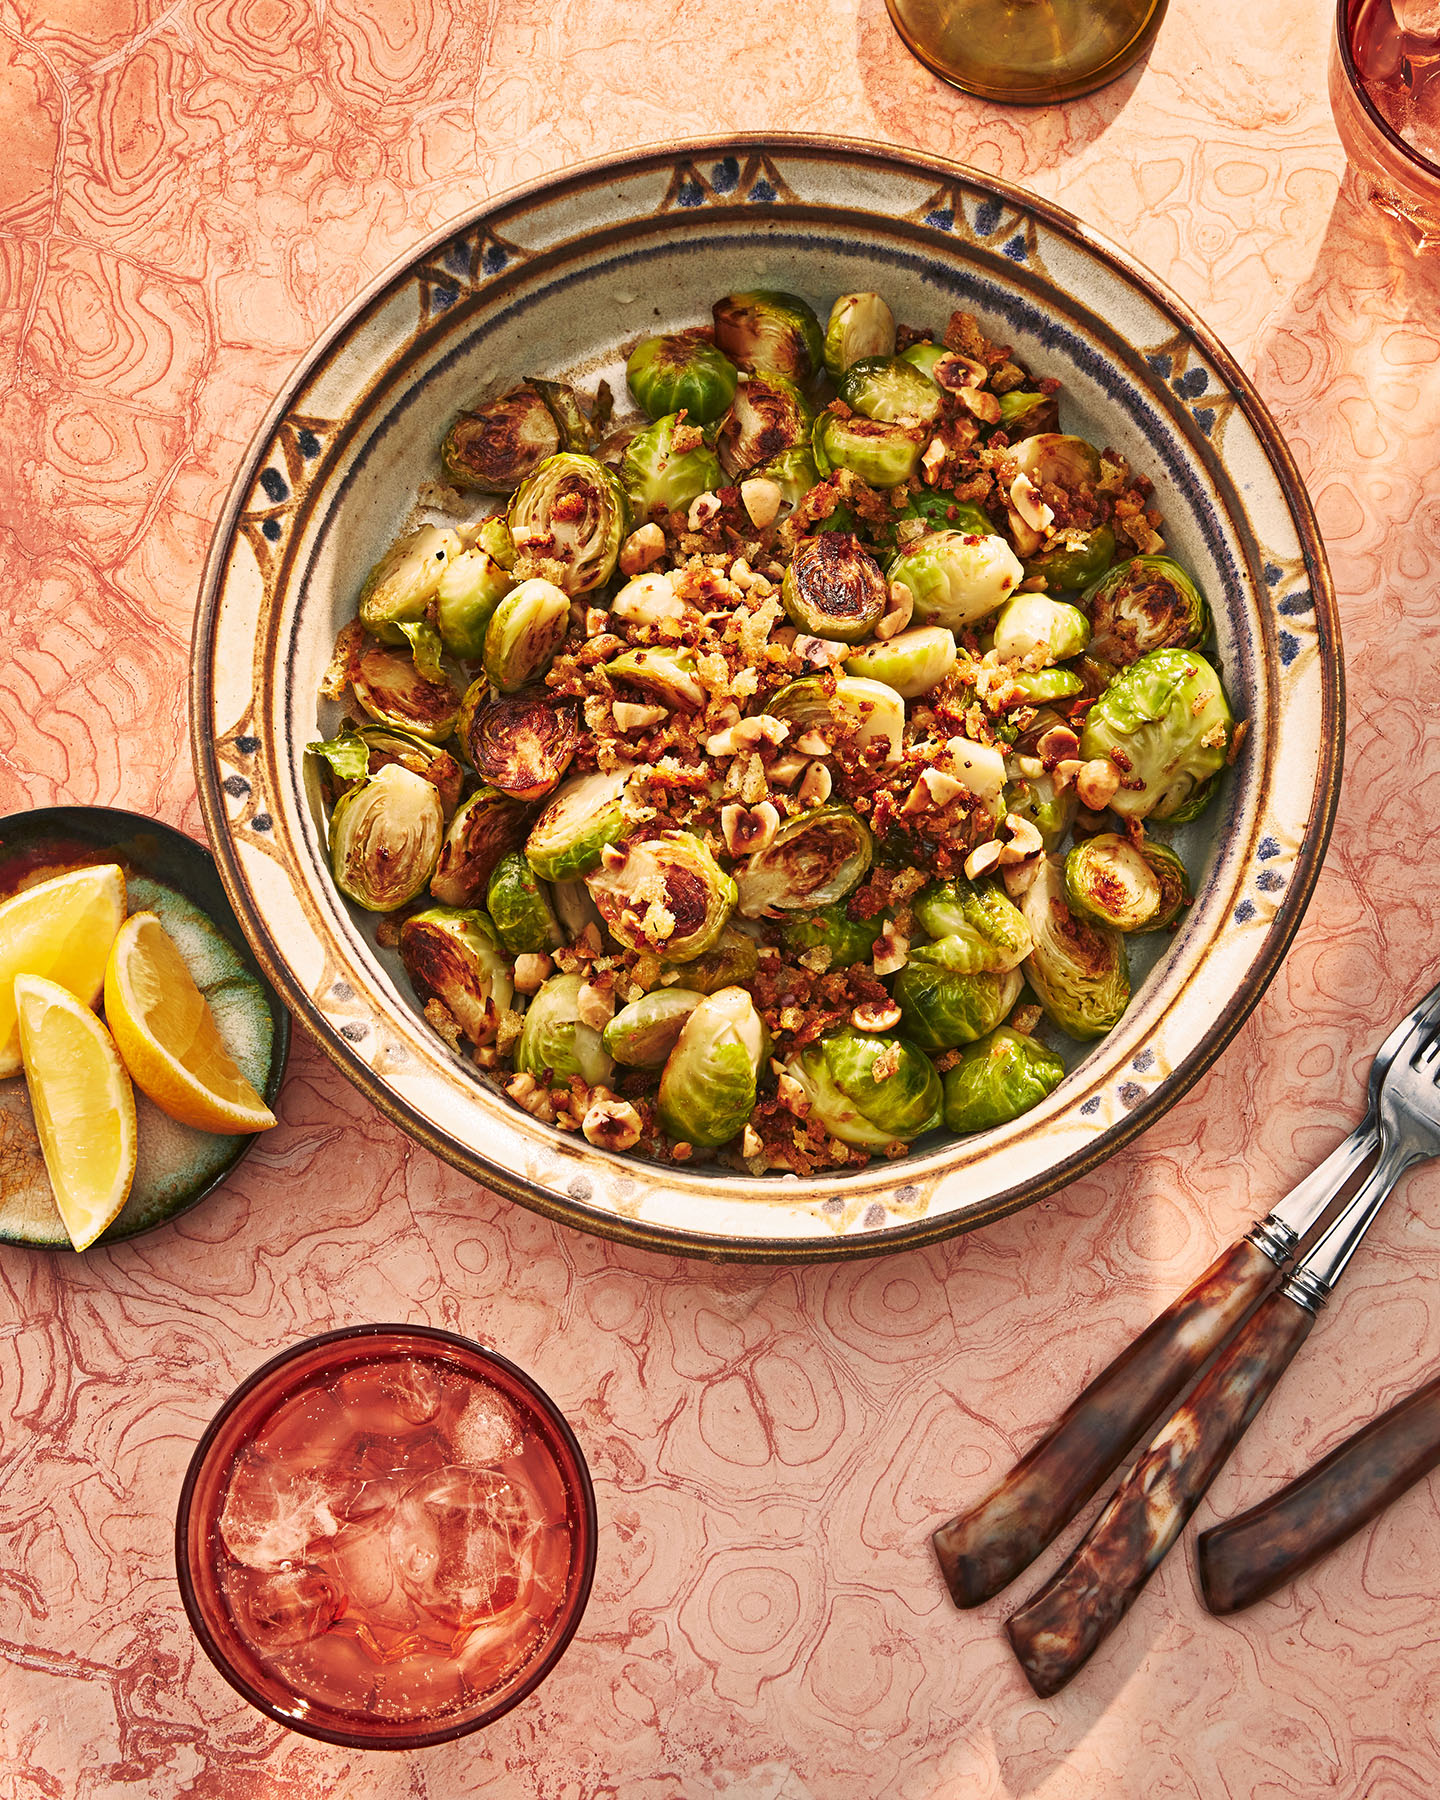 Brussel Sprouts With Hazelnuts by Casa de Suna